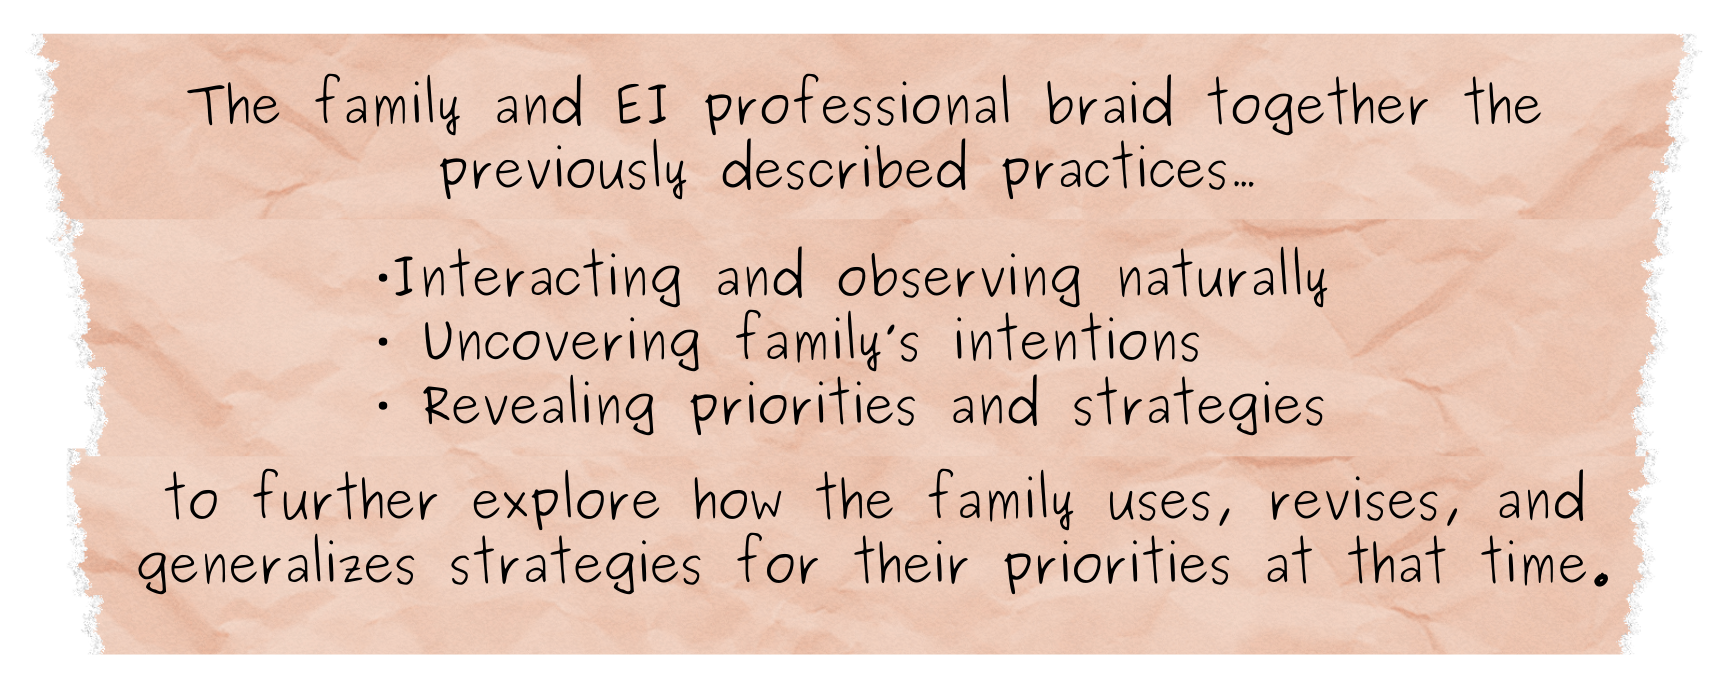 The family and EI professional braid together the previously described practices… • Interacting and observing naturally • Uncovering family’s intentions • Revealing priorities and strategies to further explore how the family uses, revises, and generalizes strategies for their priorities at that time.